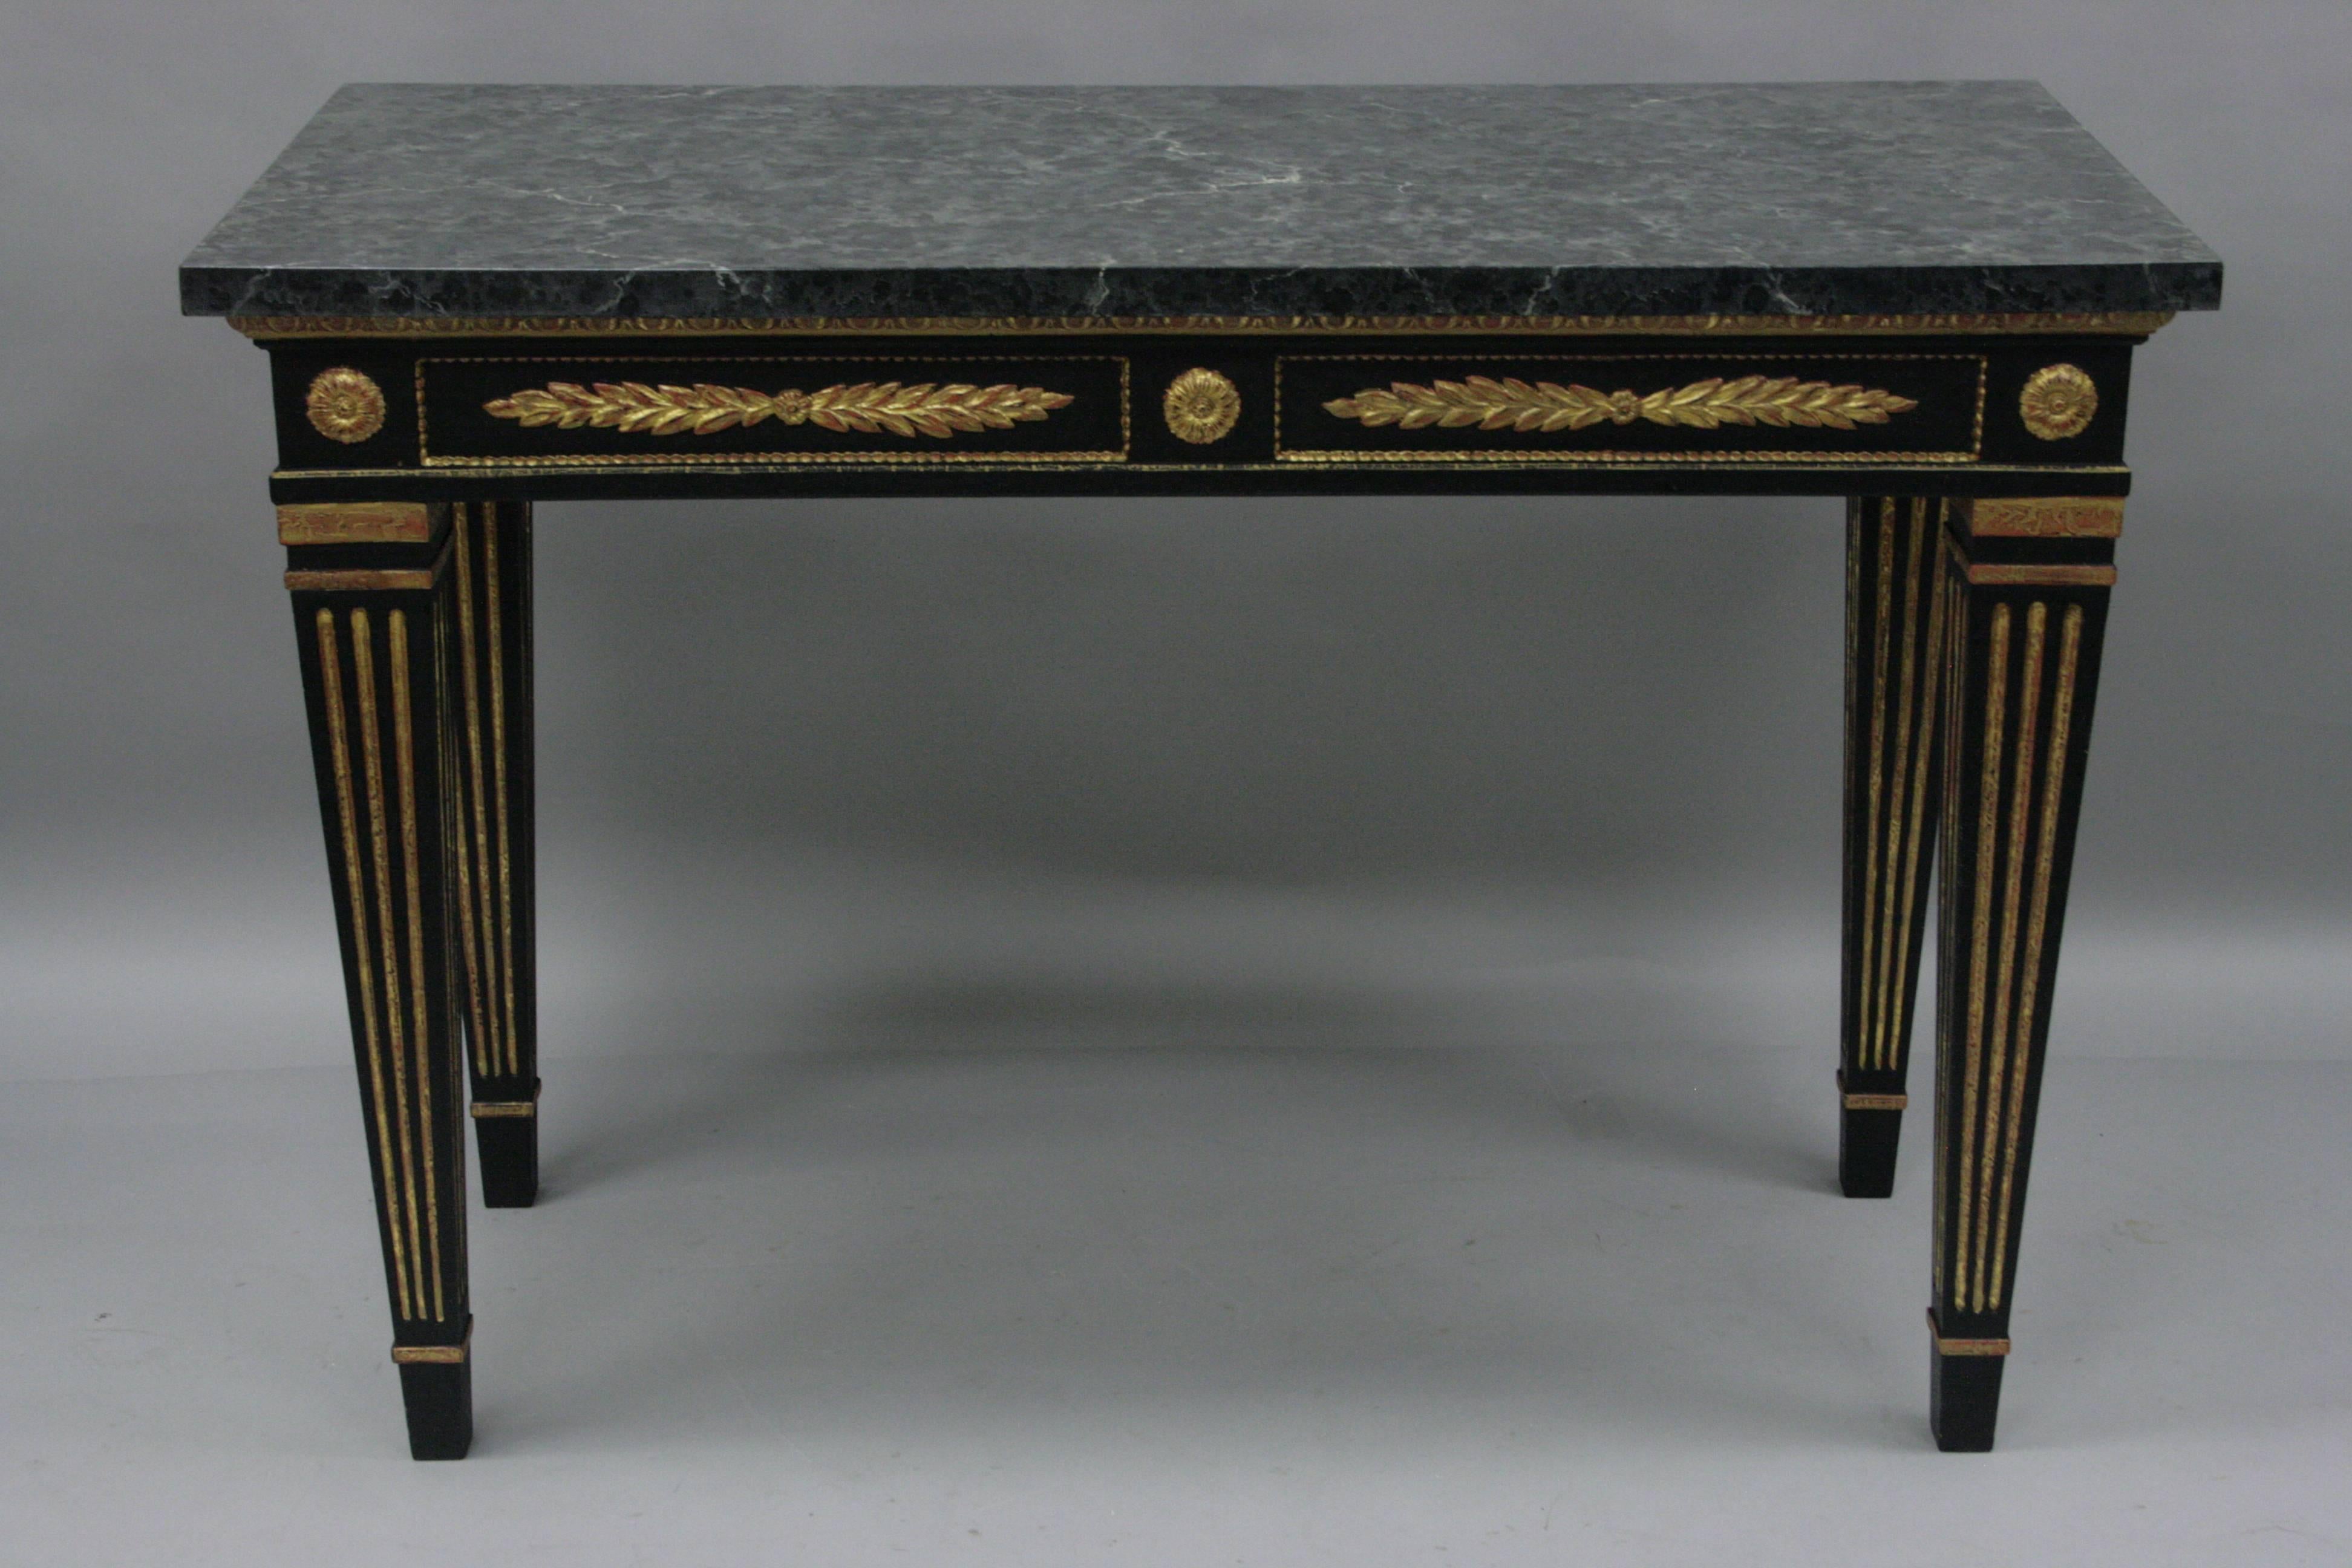 Beautiful late 20th century carved wood Louis XVI French style console table. This contemporary decorator table features a faux marble painted top, carved wood base finished in black and gold, tapered legs, elegant Directoire / Louis XVI form. Very